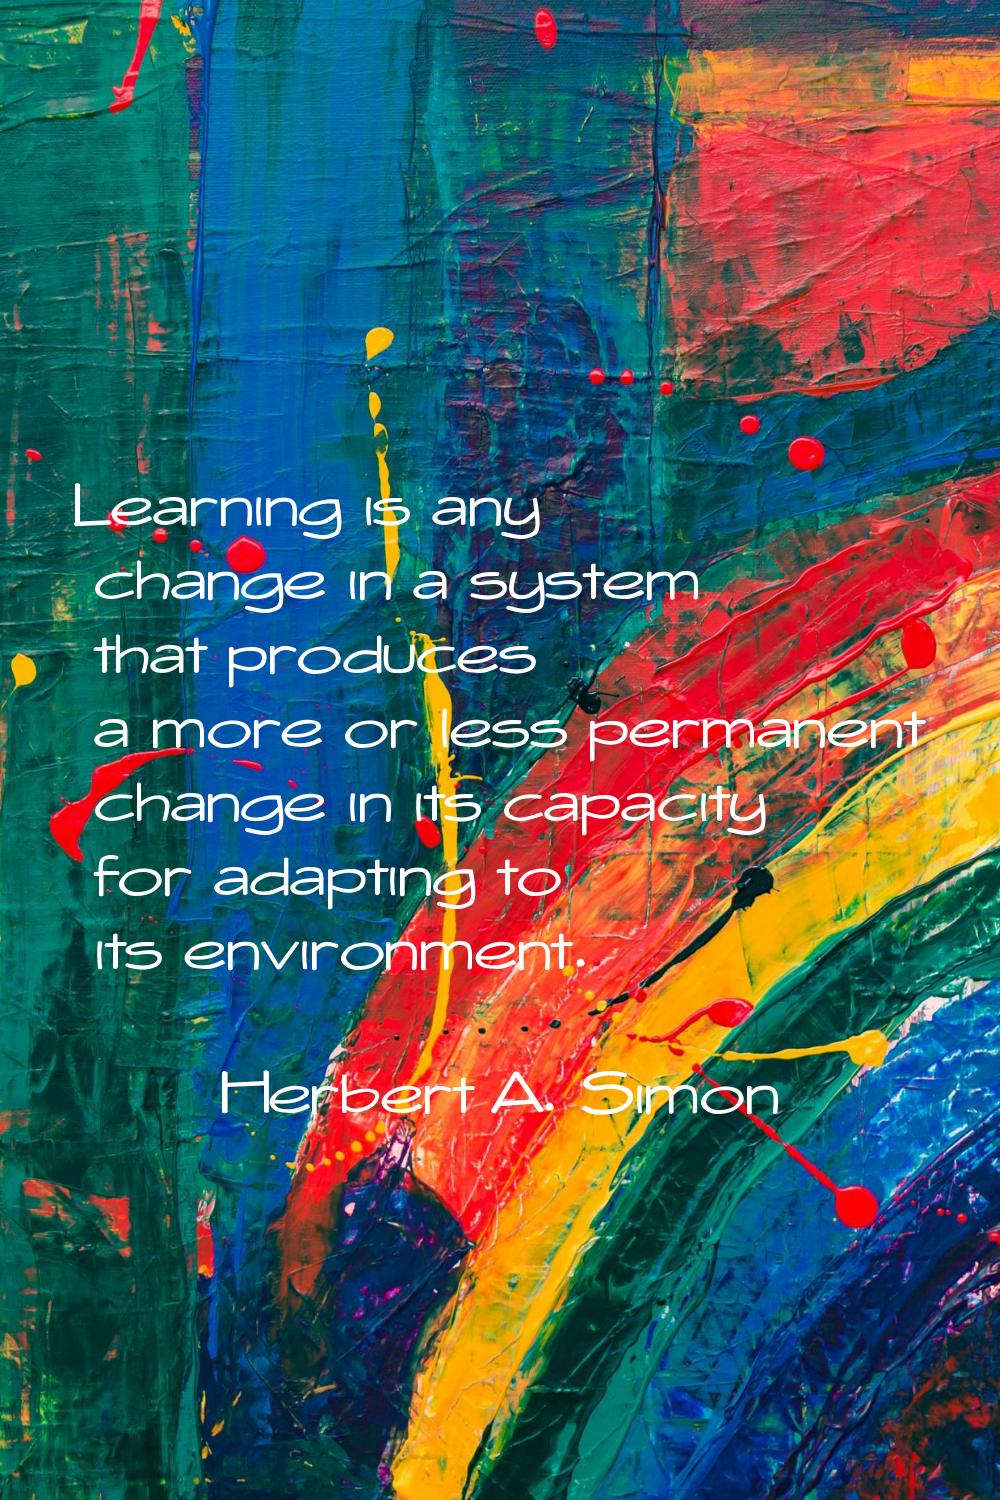 Learning is any change in a system that produces a more or less permanent change in its capacity fo